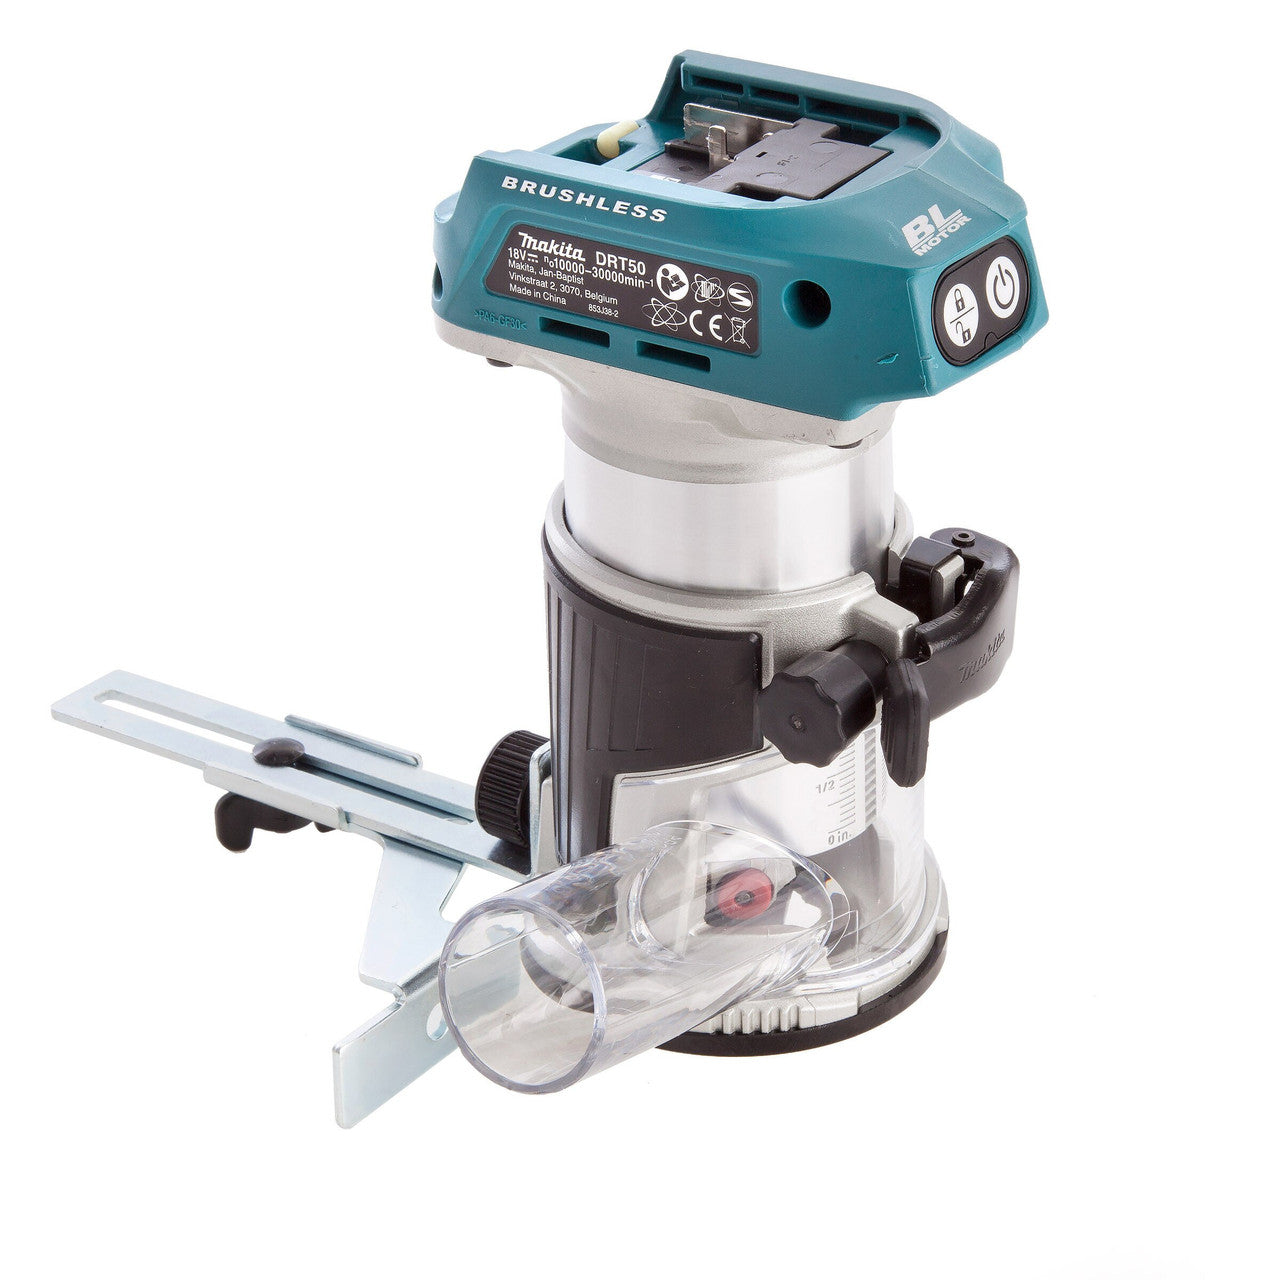 Makita DRT50ZJ 18V Brushless Router/Trimmer (Body Only) with Trimmer Base & Straight Guide in Makpac Case